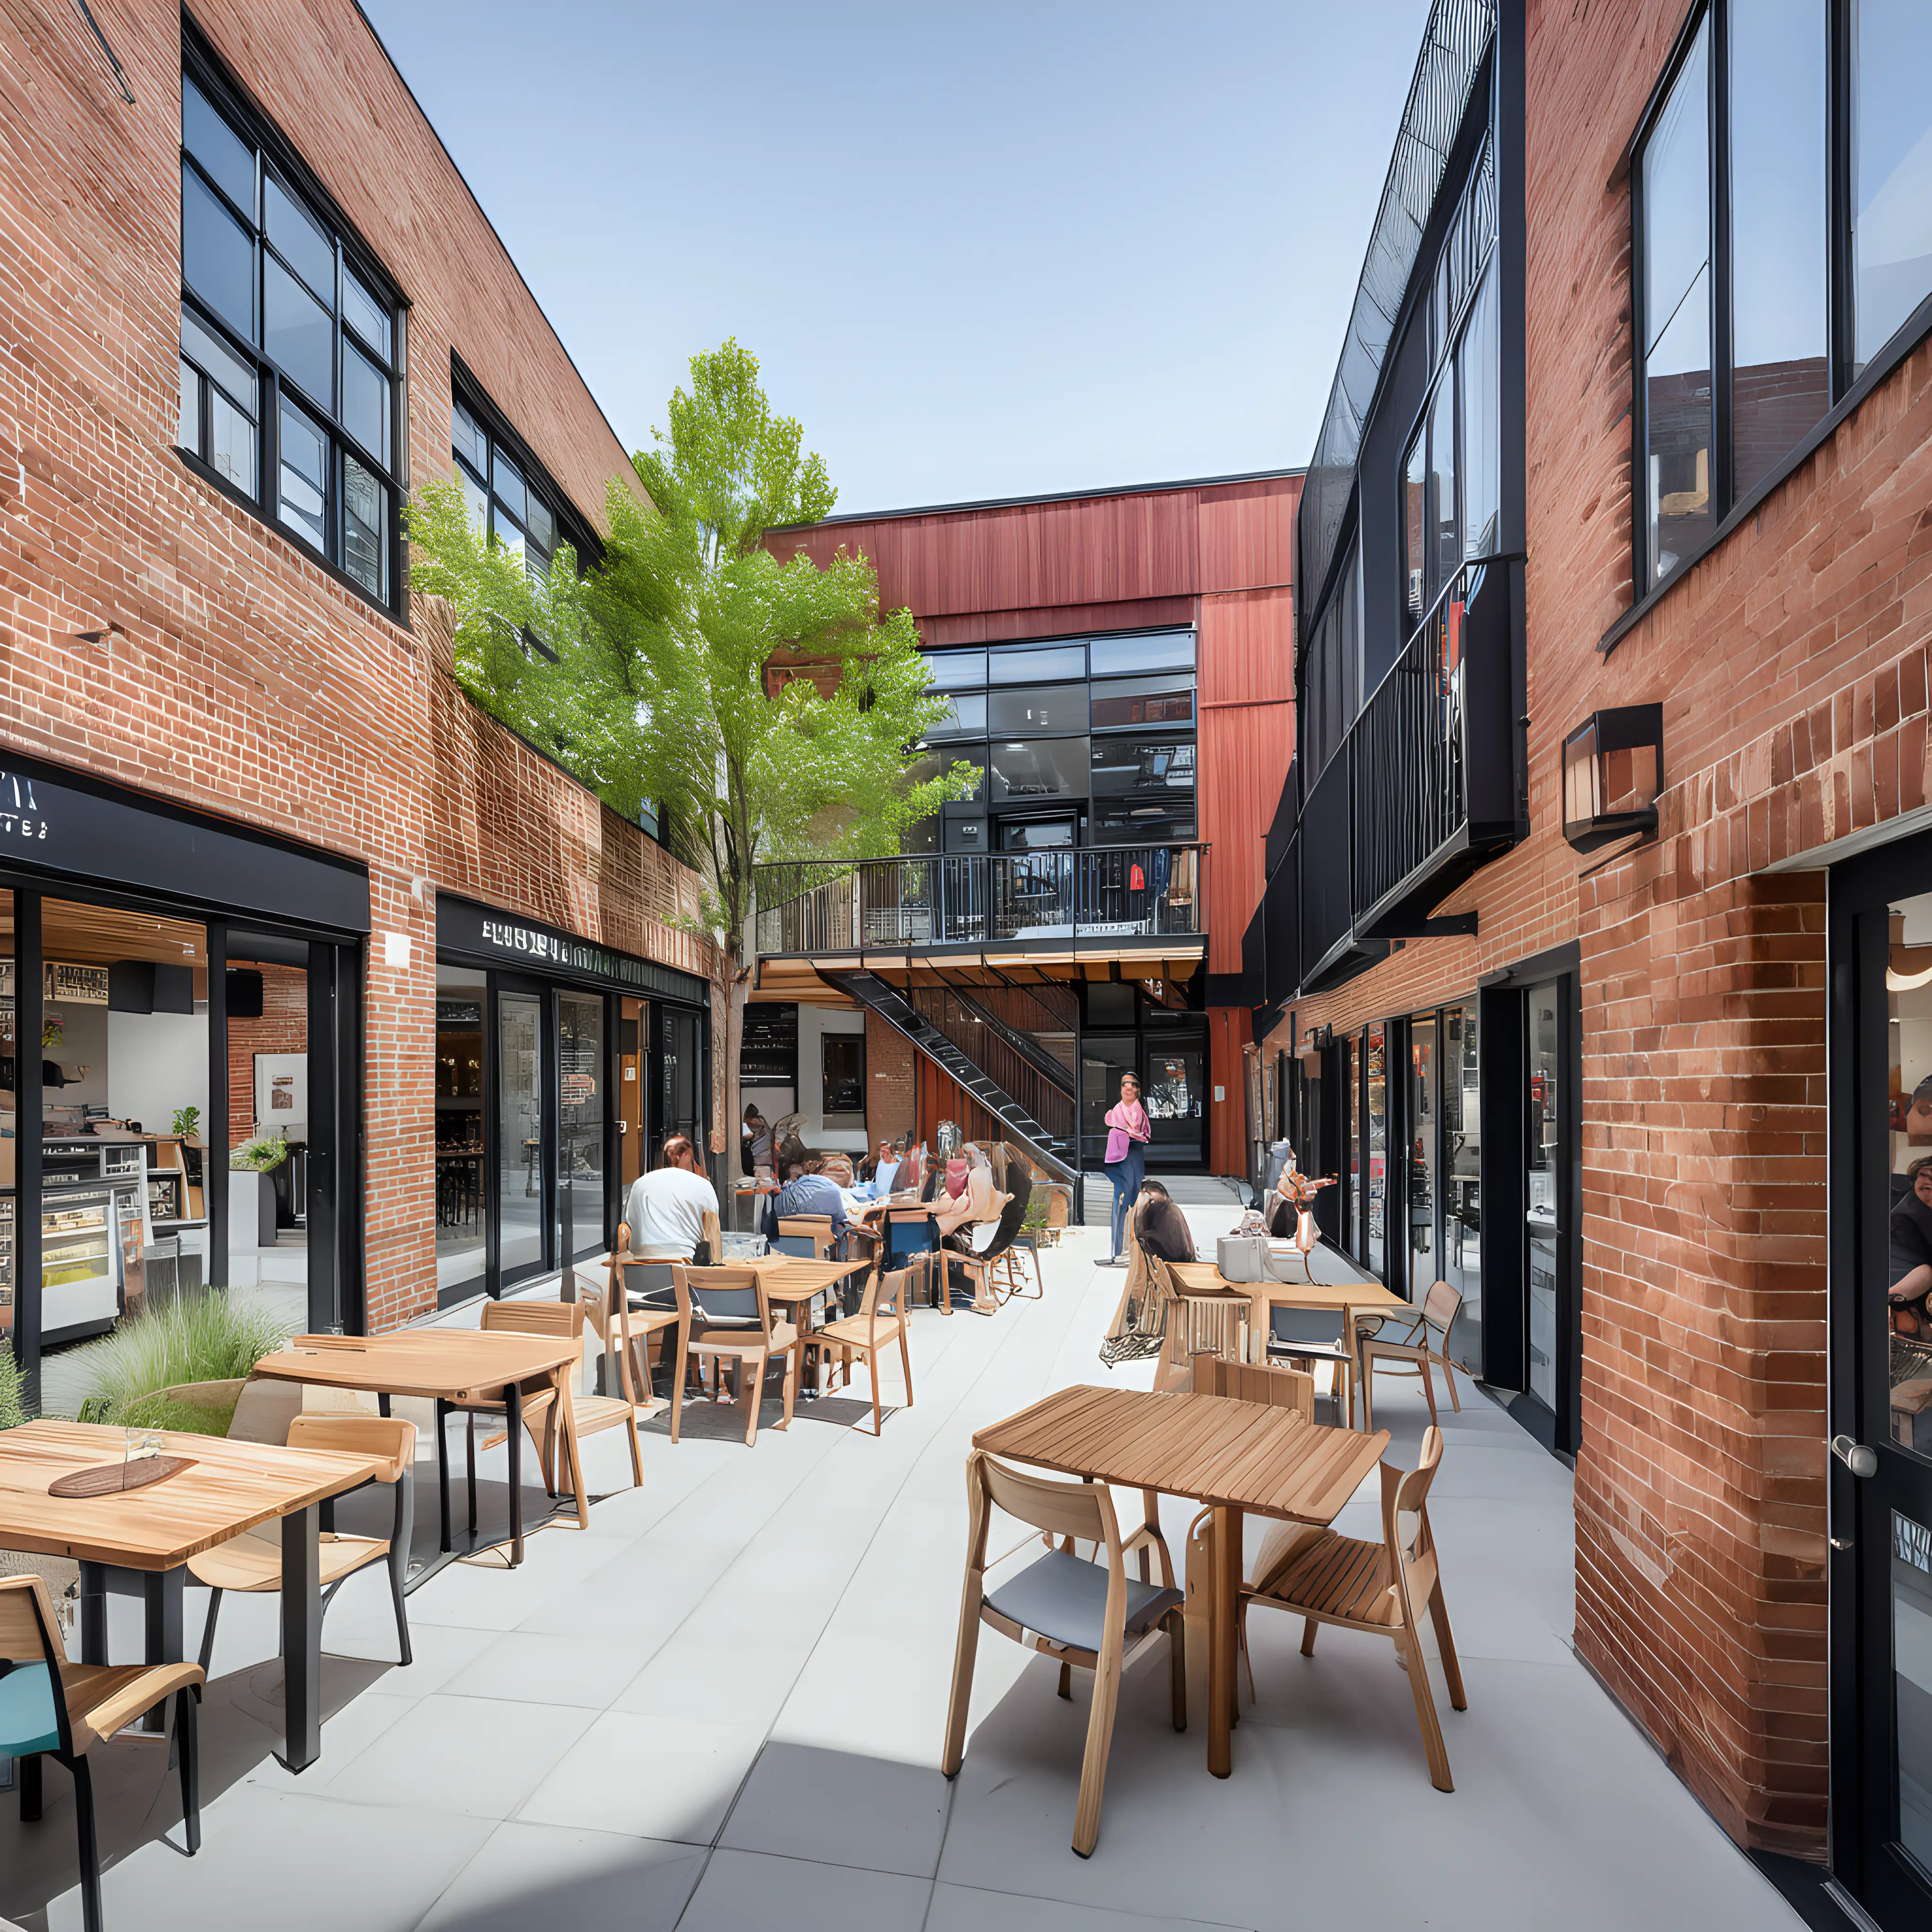 PostModern MixedUse Community Art Center with Retail Spaces and Courtyard